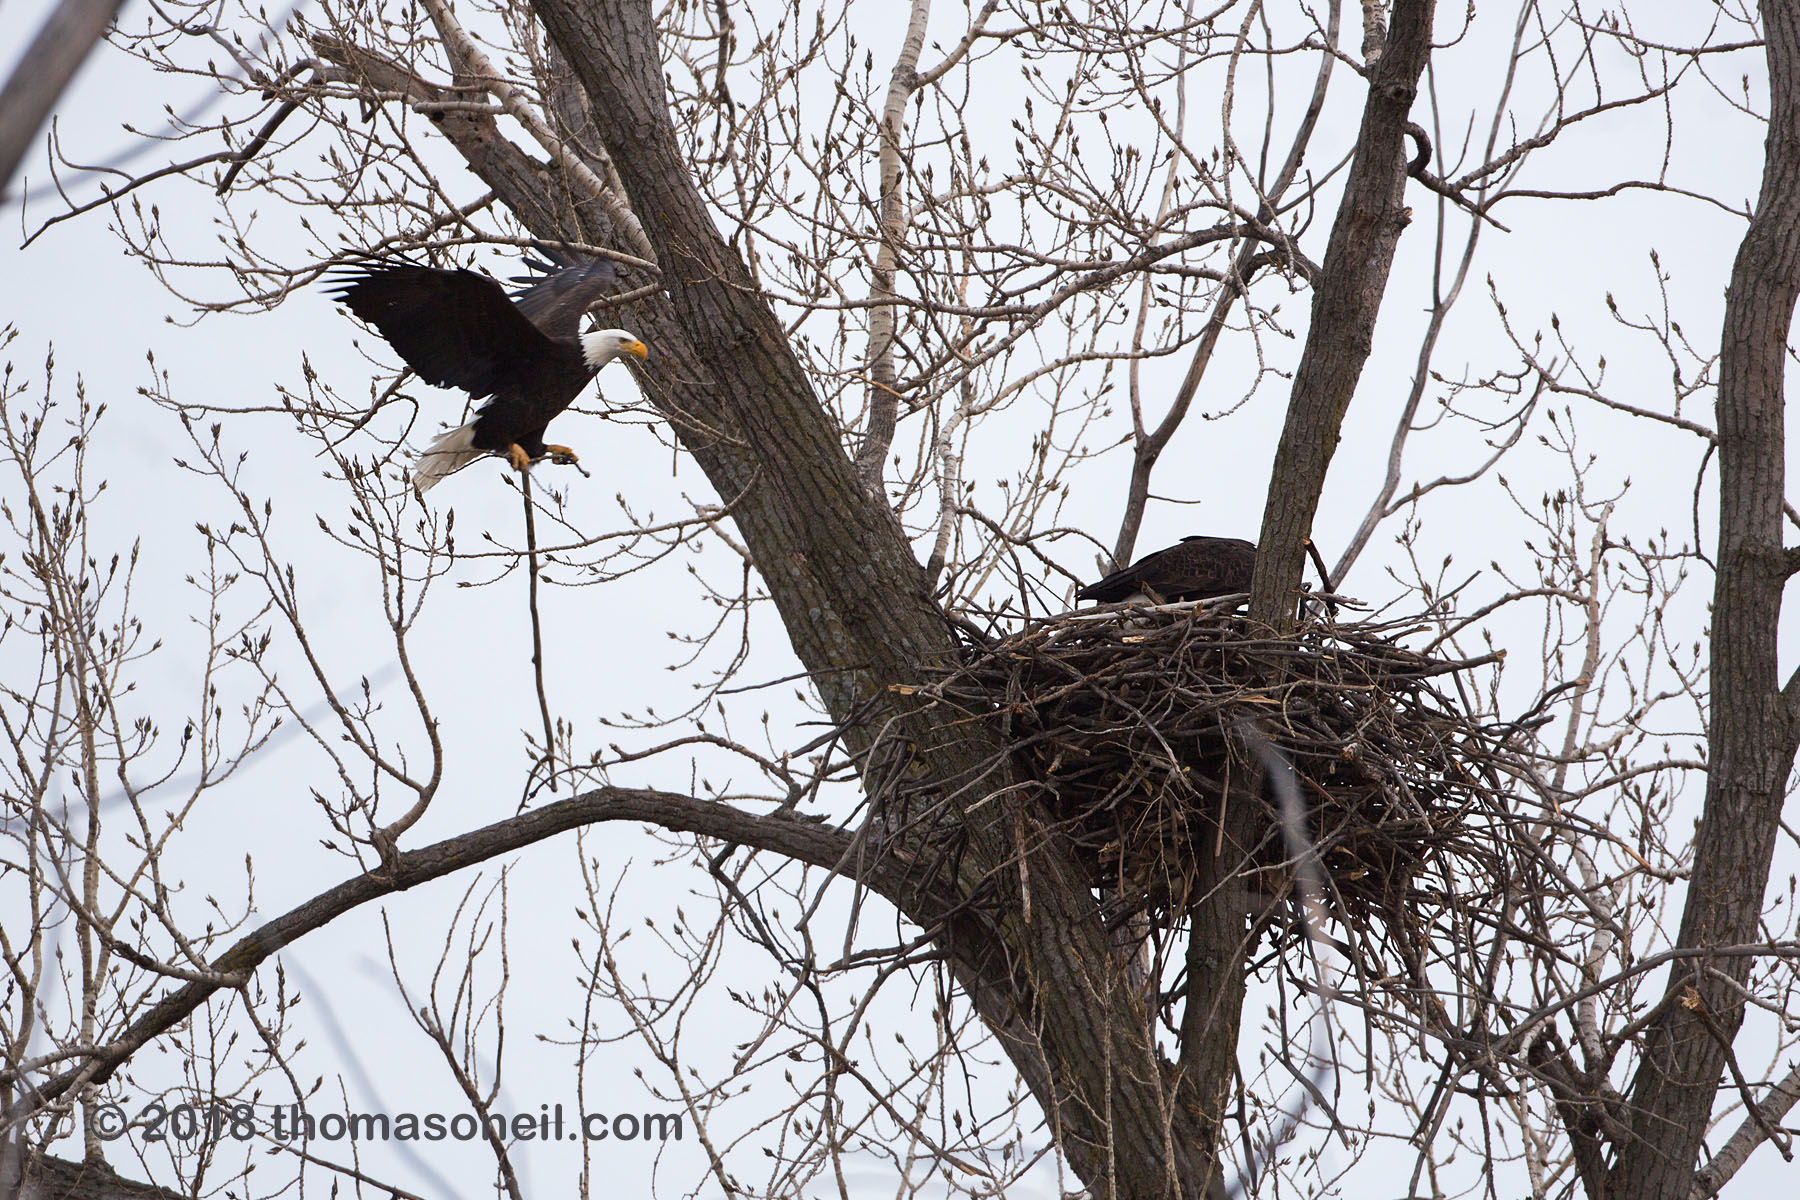 Bald eagle returning to the nest, Loess Bluffs National Wildlife Refuge, Missouri.  Click for next photo.